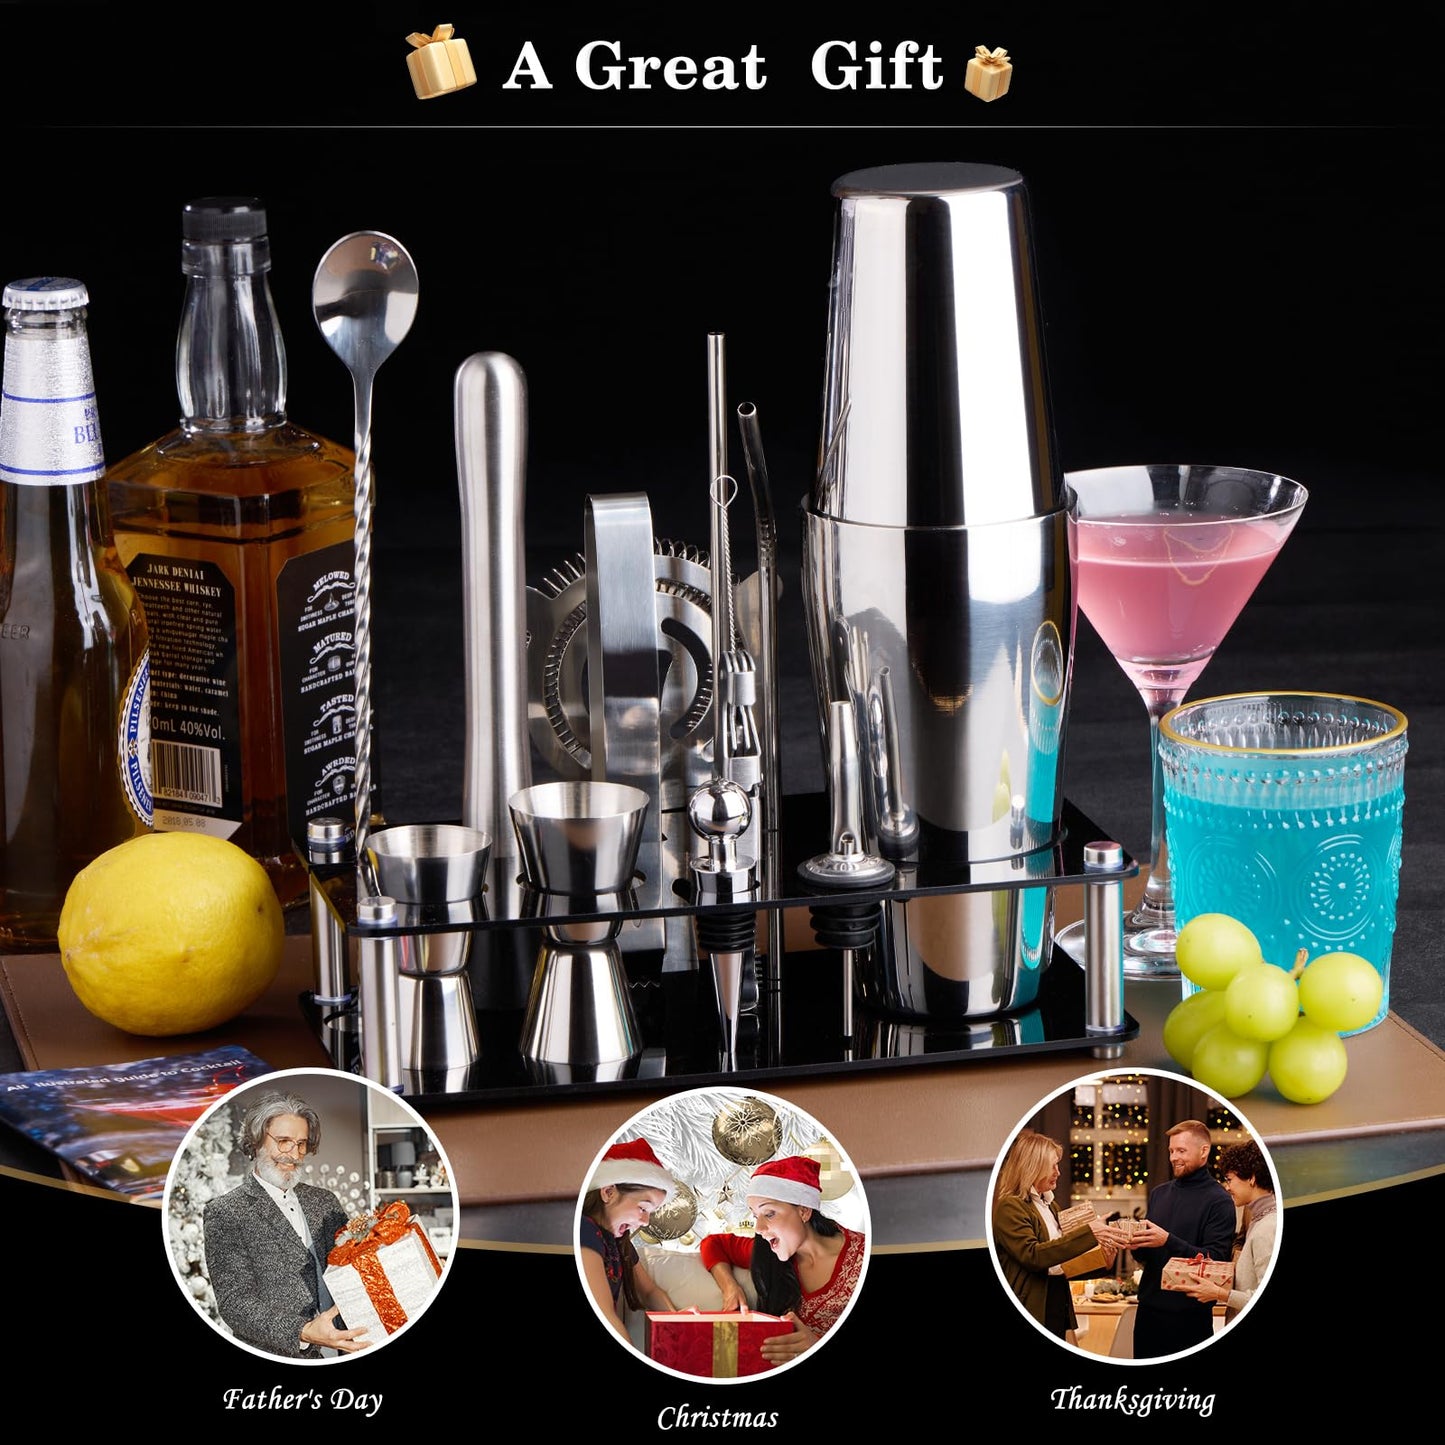 Cocktail Shaker Set Bartender Kit : 15-Piece Bar Tool Set with Acrylic Stand Bar Set with All Practical Bar Accessories, for Drink Mixing, Bar, Home, Lounge & Party, Silver